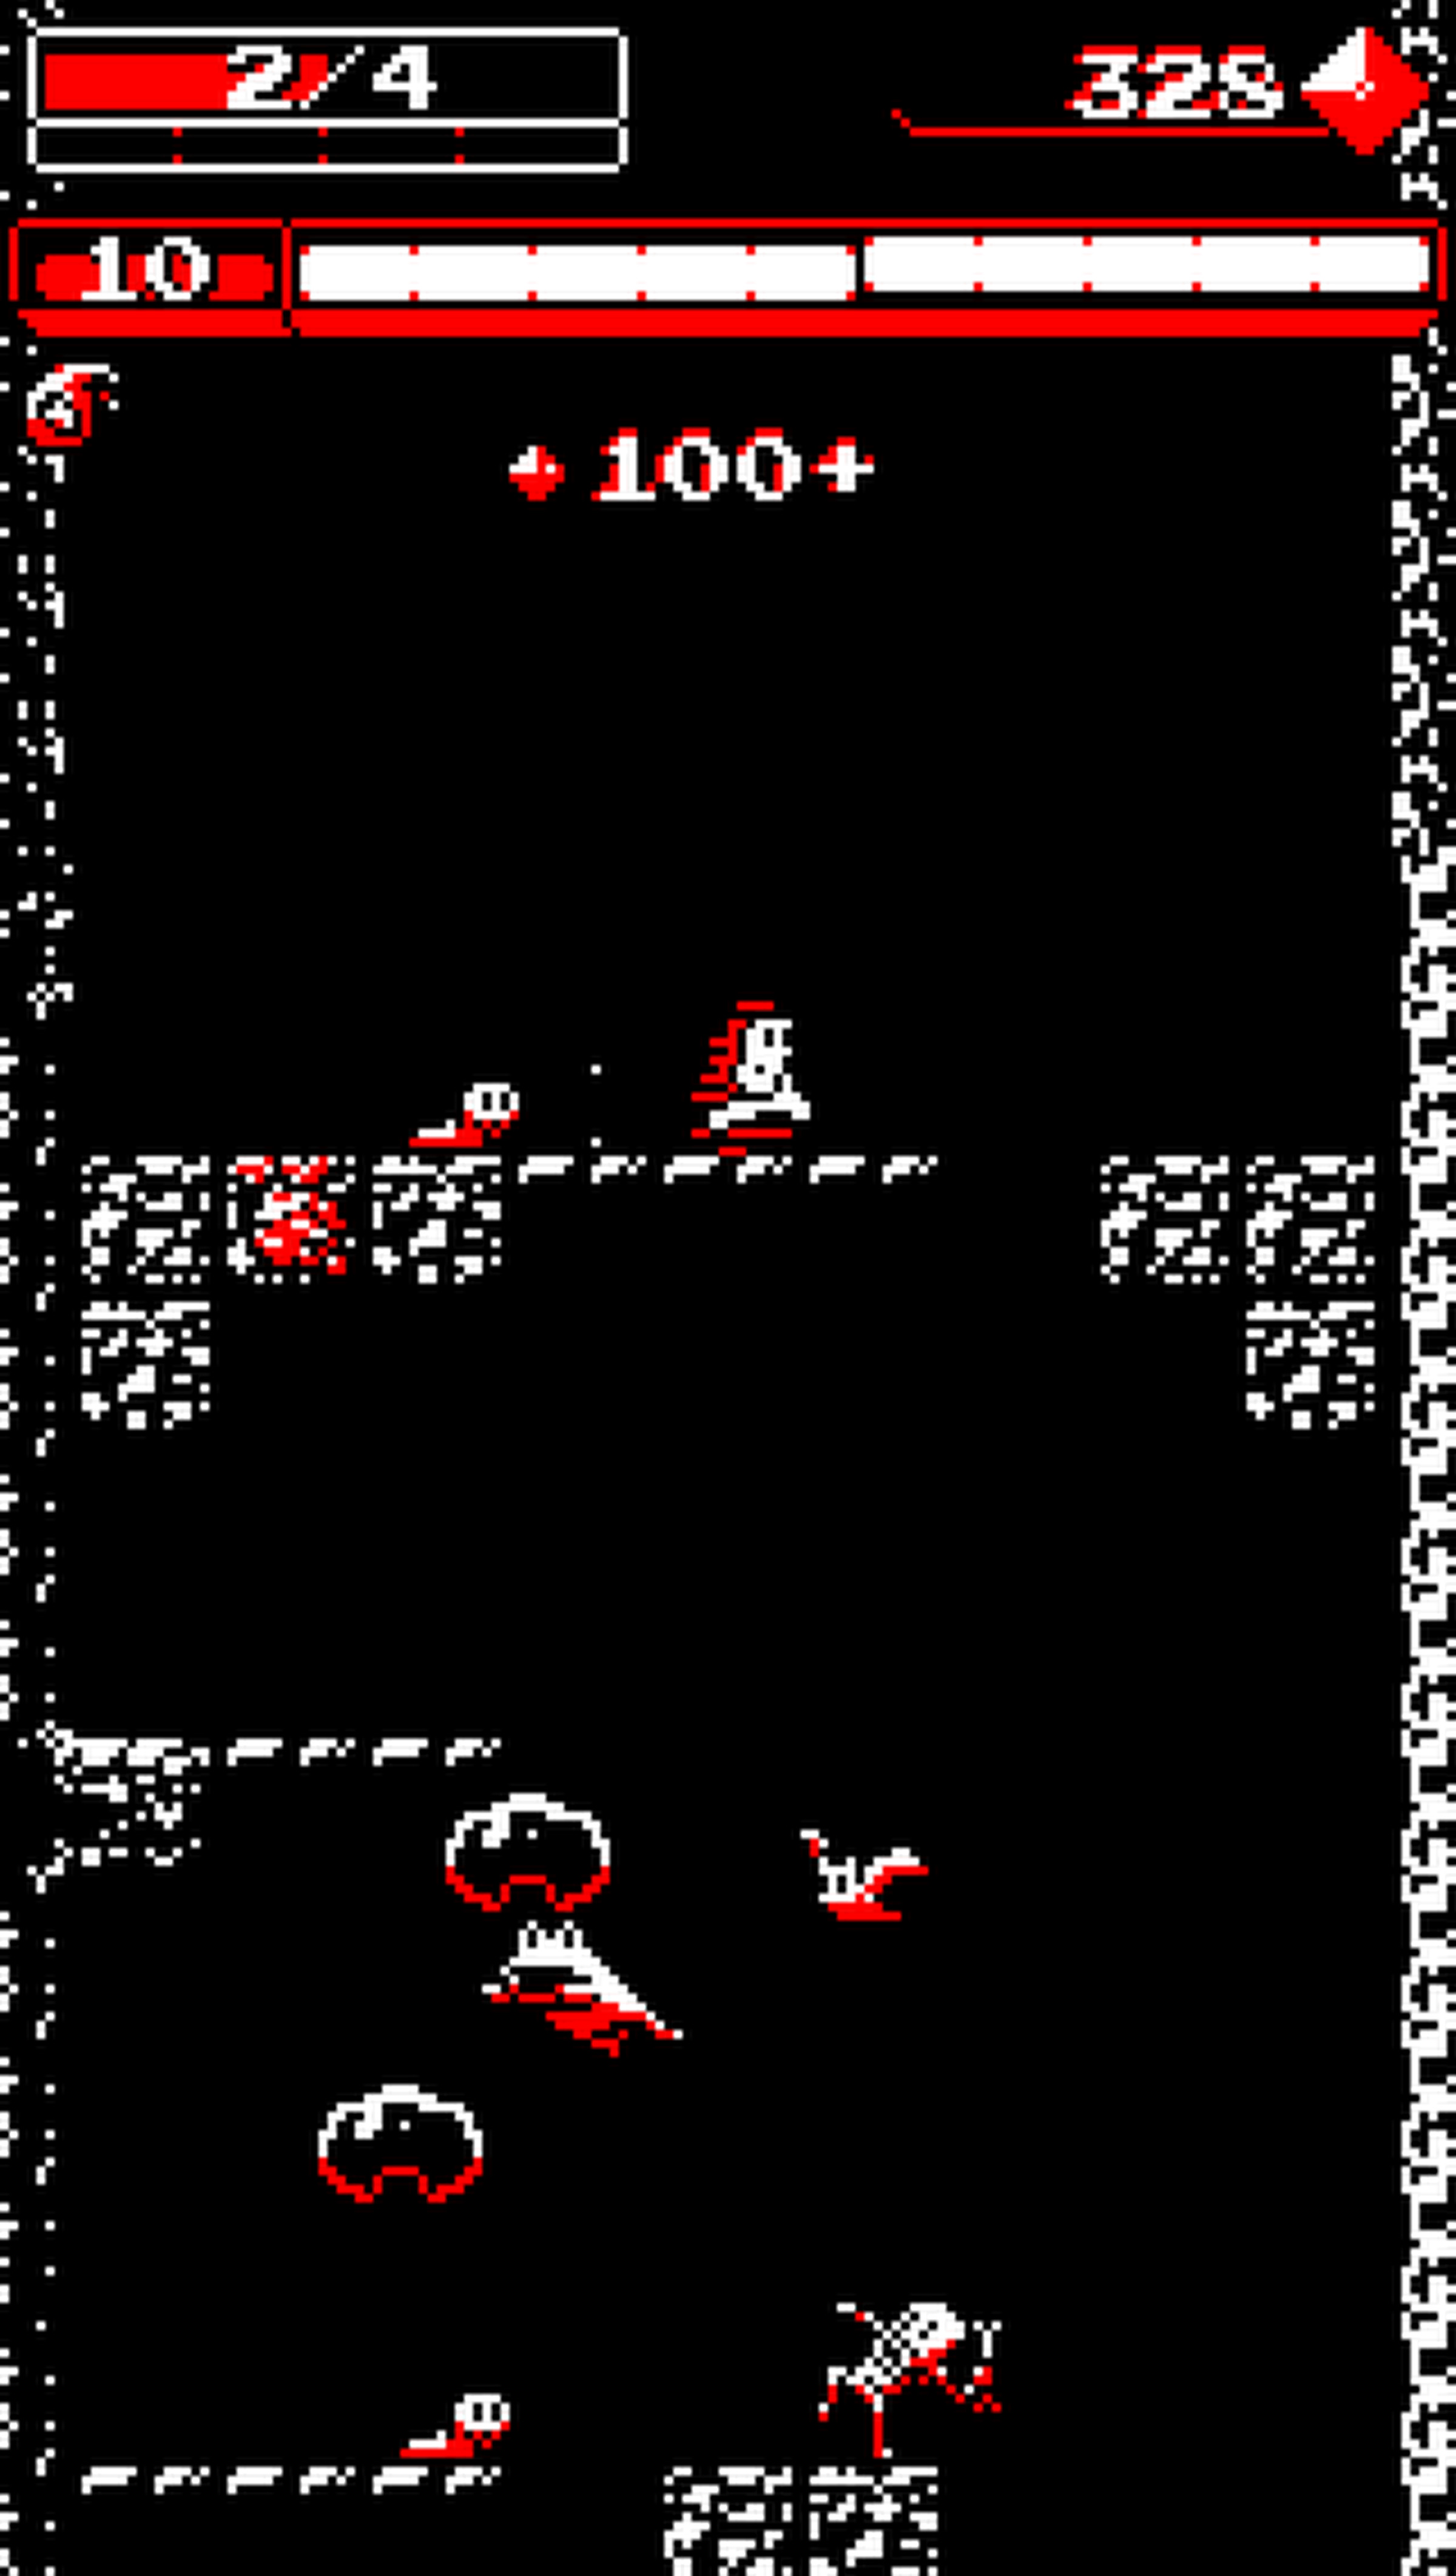 A screenshot from the video game Downwell+.